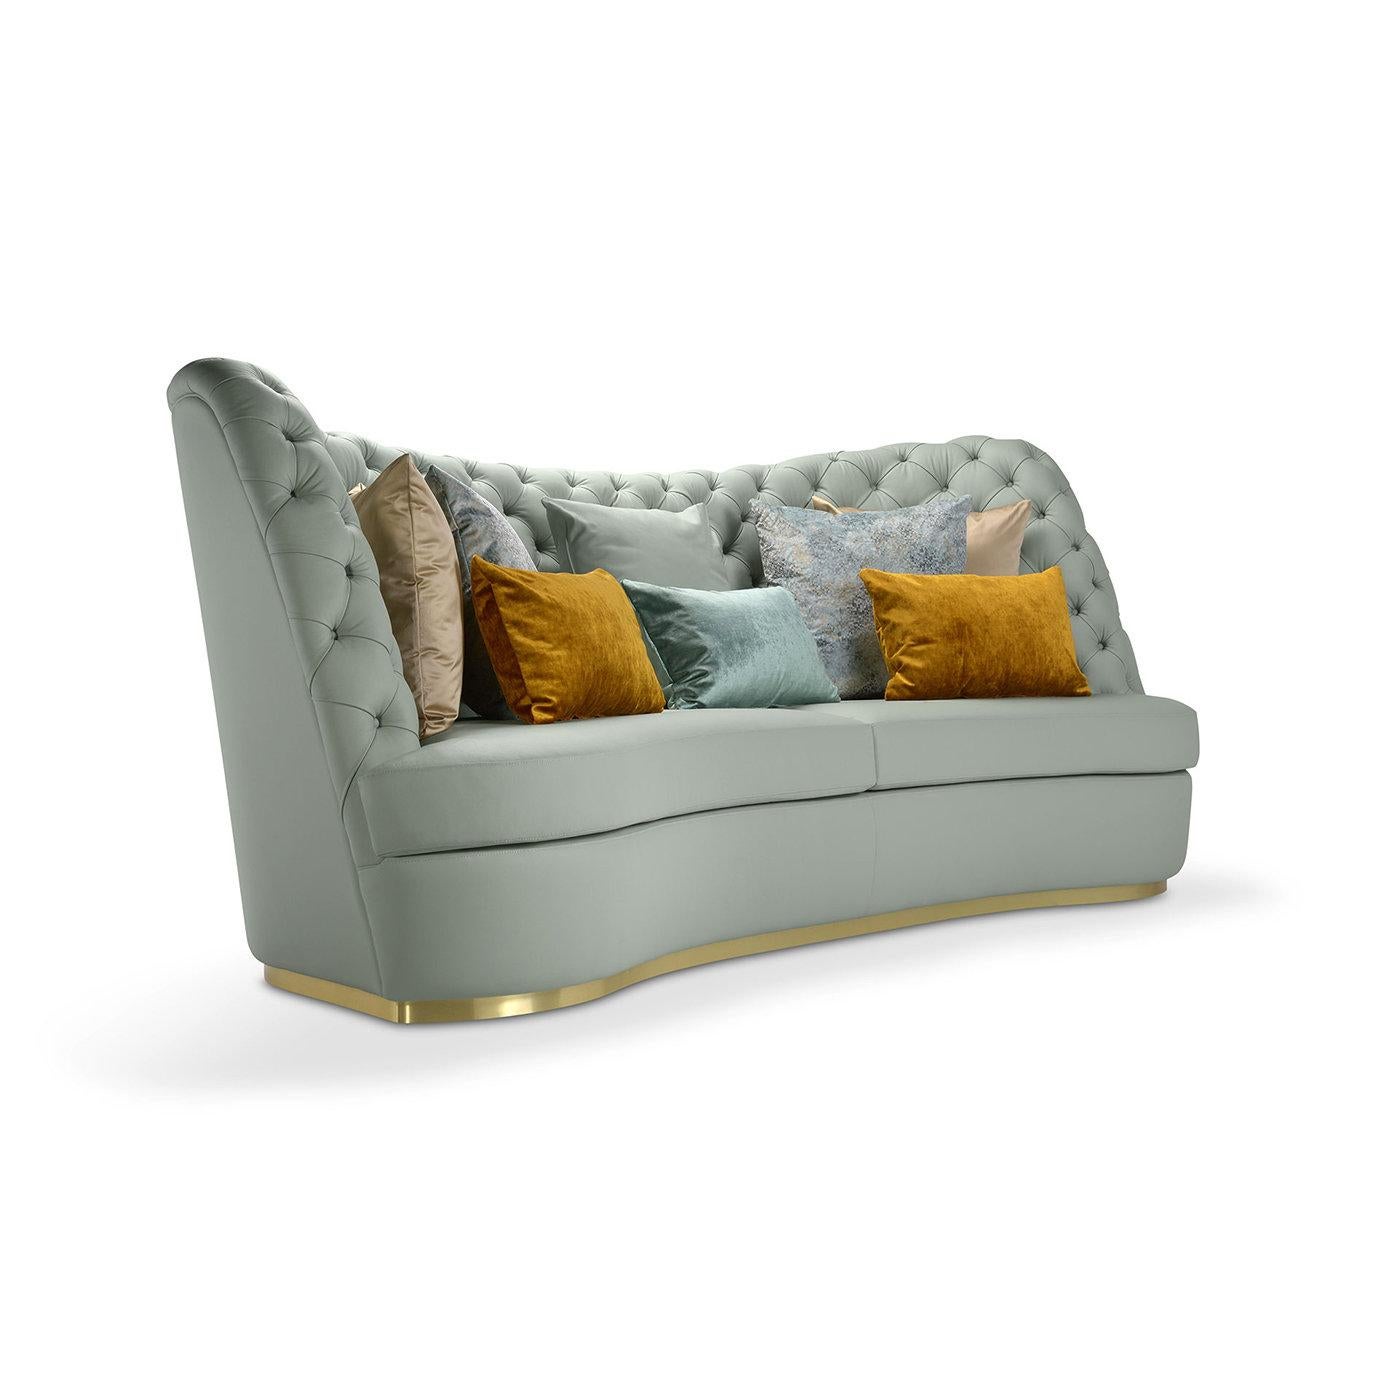 Named after Thalia, muse patron of comedy in Greek mythology, this four-seater sofa will not go unnoticed with its majestic, sartorial look. The abudantly padded wooden frame is upholstered in light-blue-hued leather awakening the senses of touch